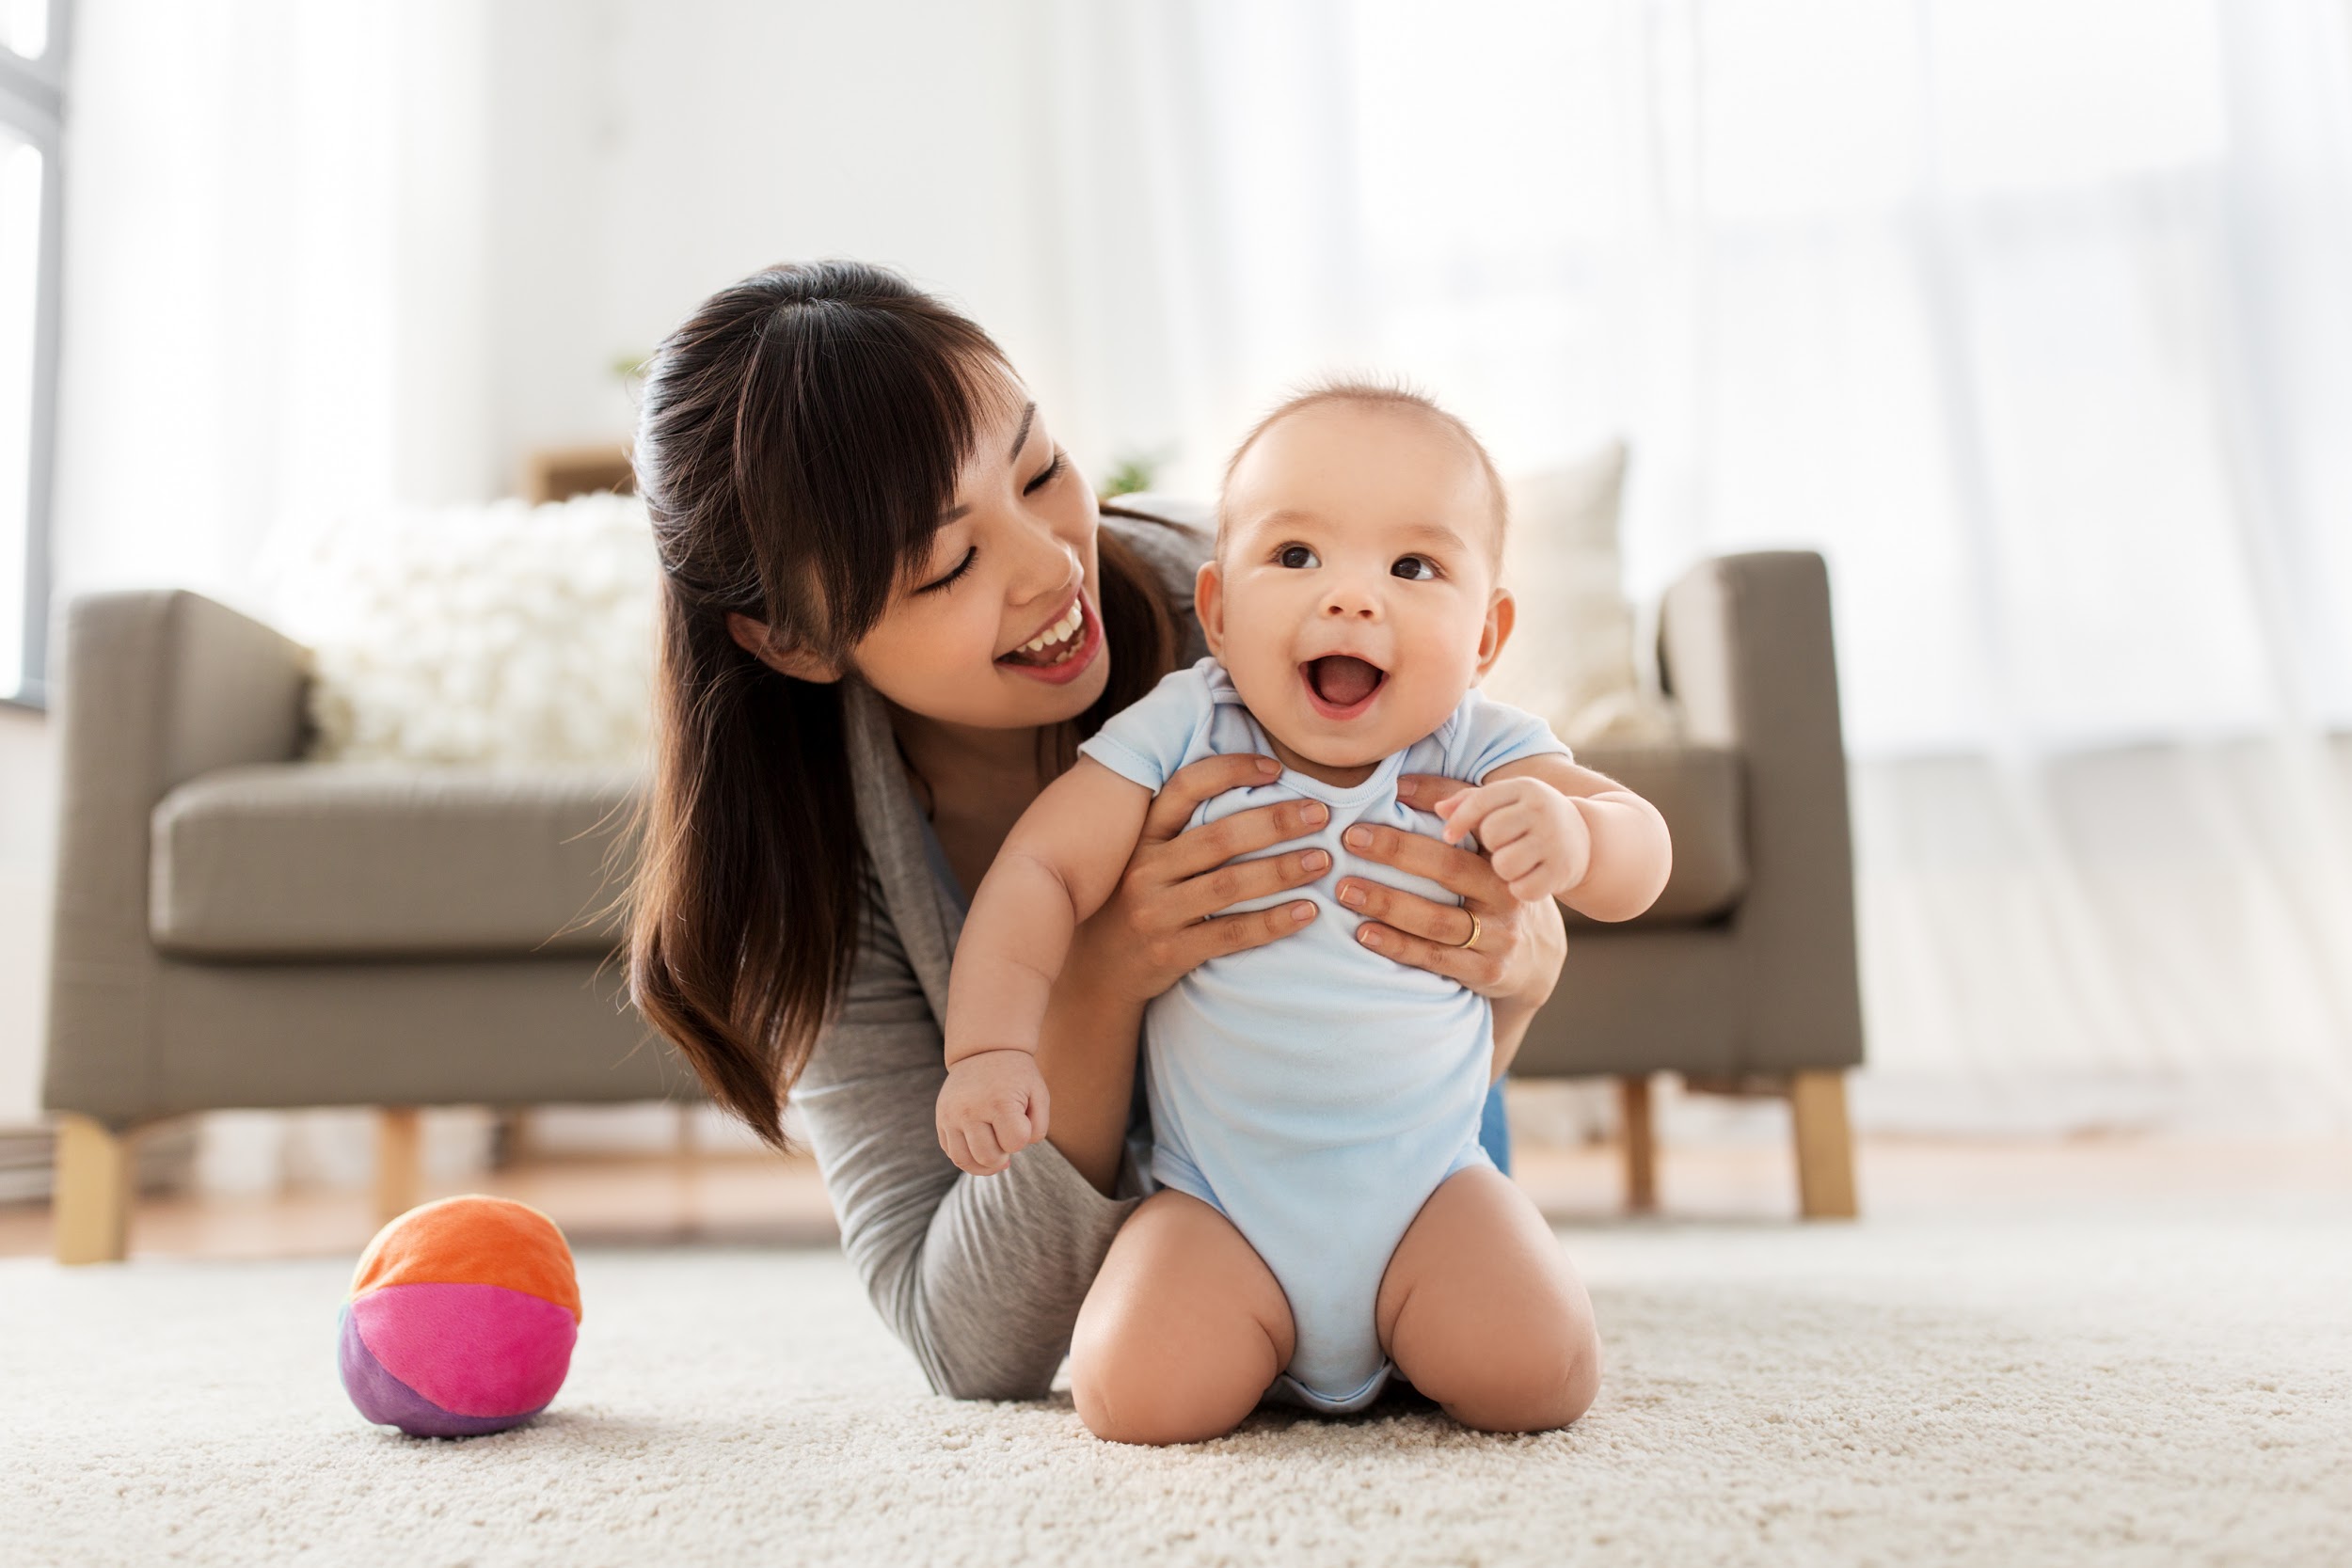 How to Choose the Right Caregiver for Your Baby